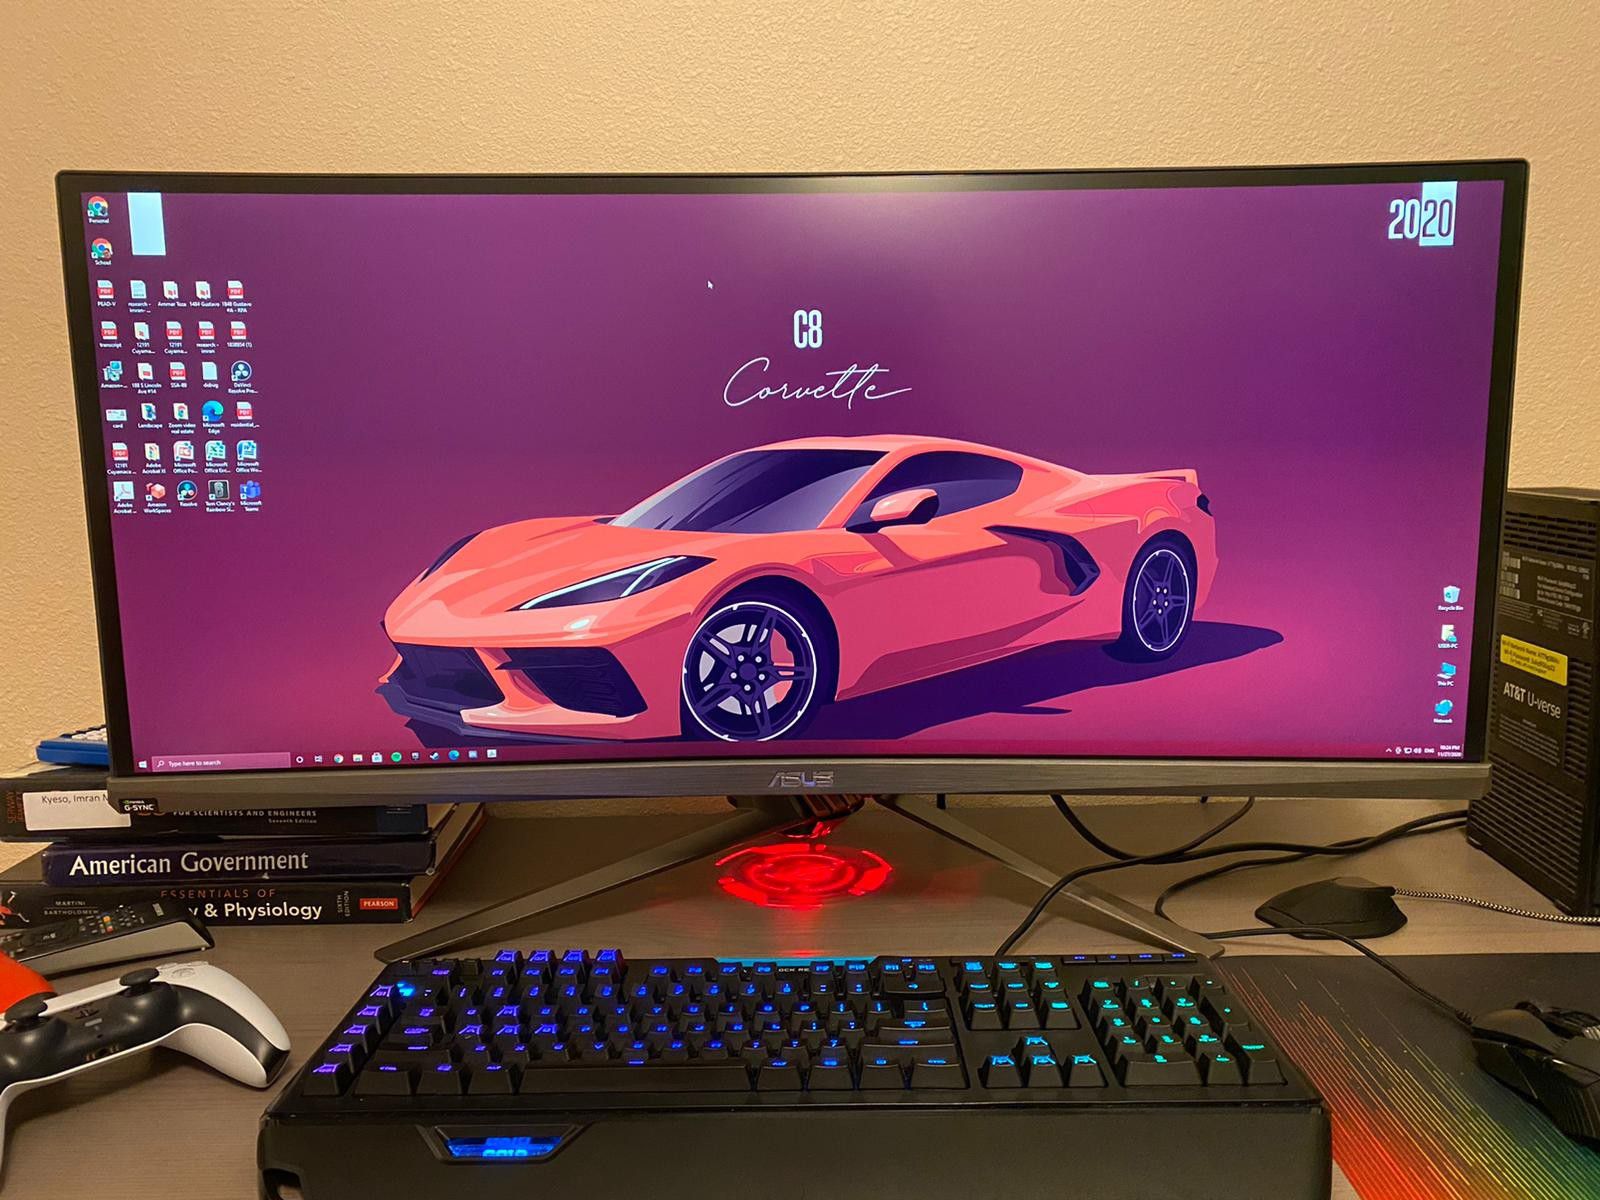 ASUS ROG Swift PG348Q 34" Gaming Monitor Curved Ultra-Wide 3440x1440